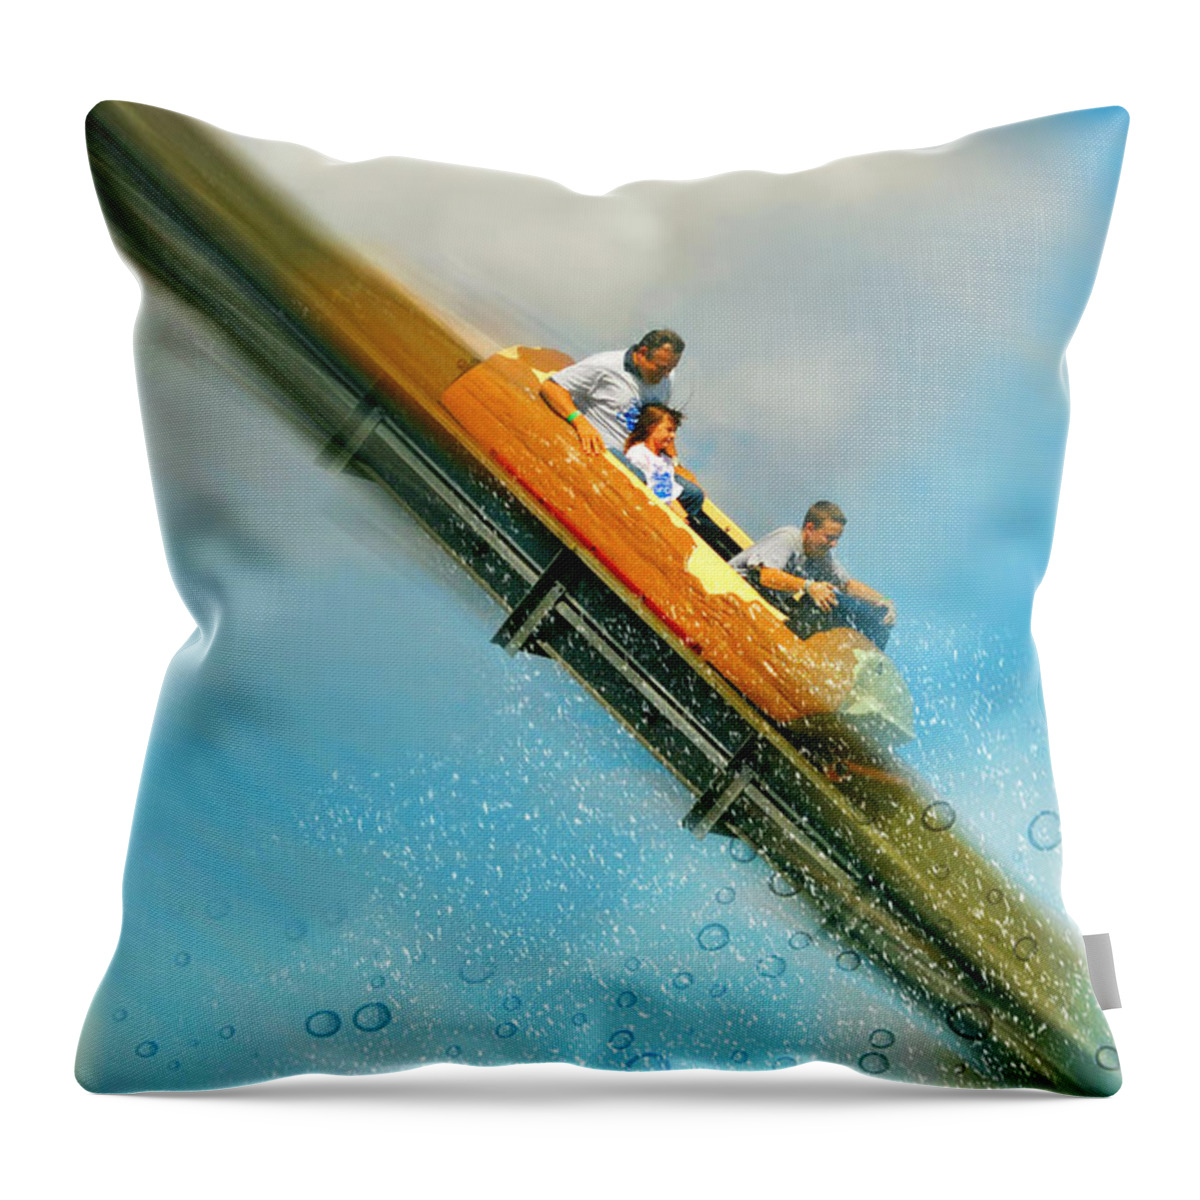 Miscellaneous Throw Pillow featuring the photograph The Flume by Diana Angstadt